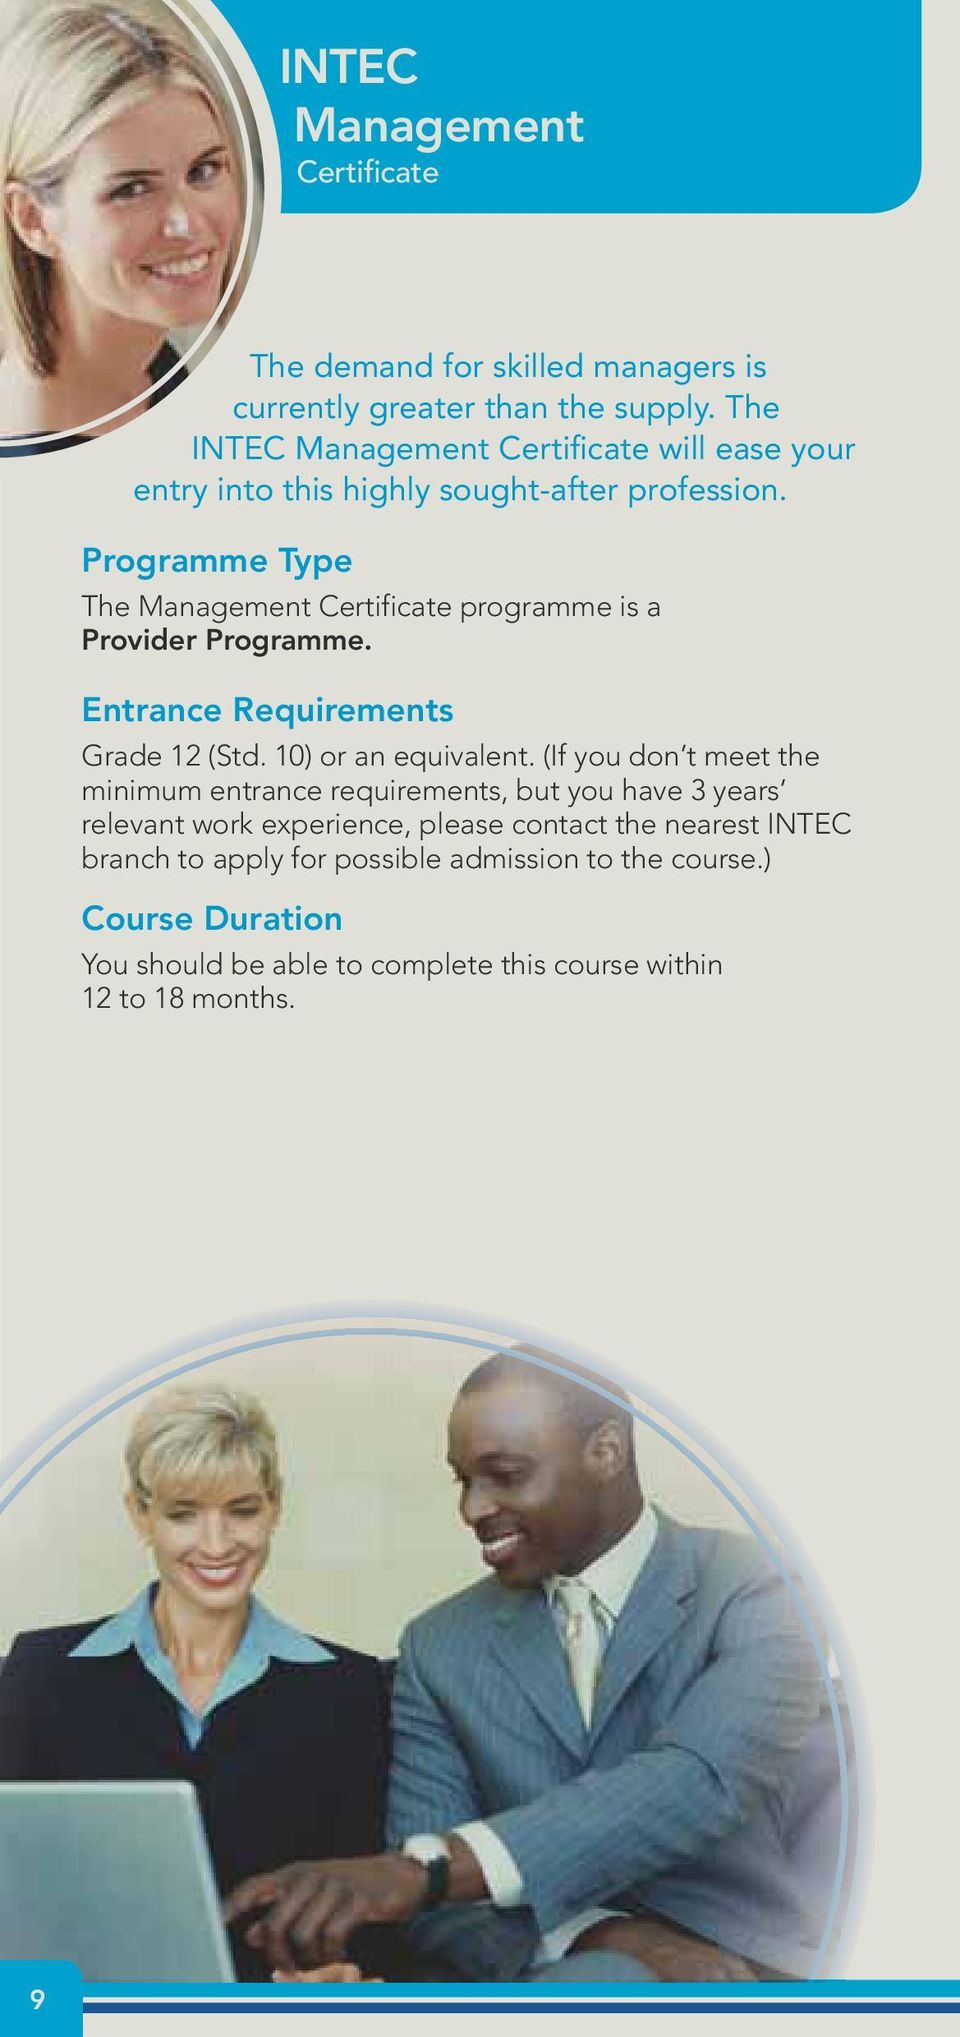 Programme Type The Management Certificate programme is a Provider Programme. Entrance Requirements Grade 12 (Std. 10) or an equivalent.